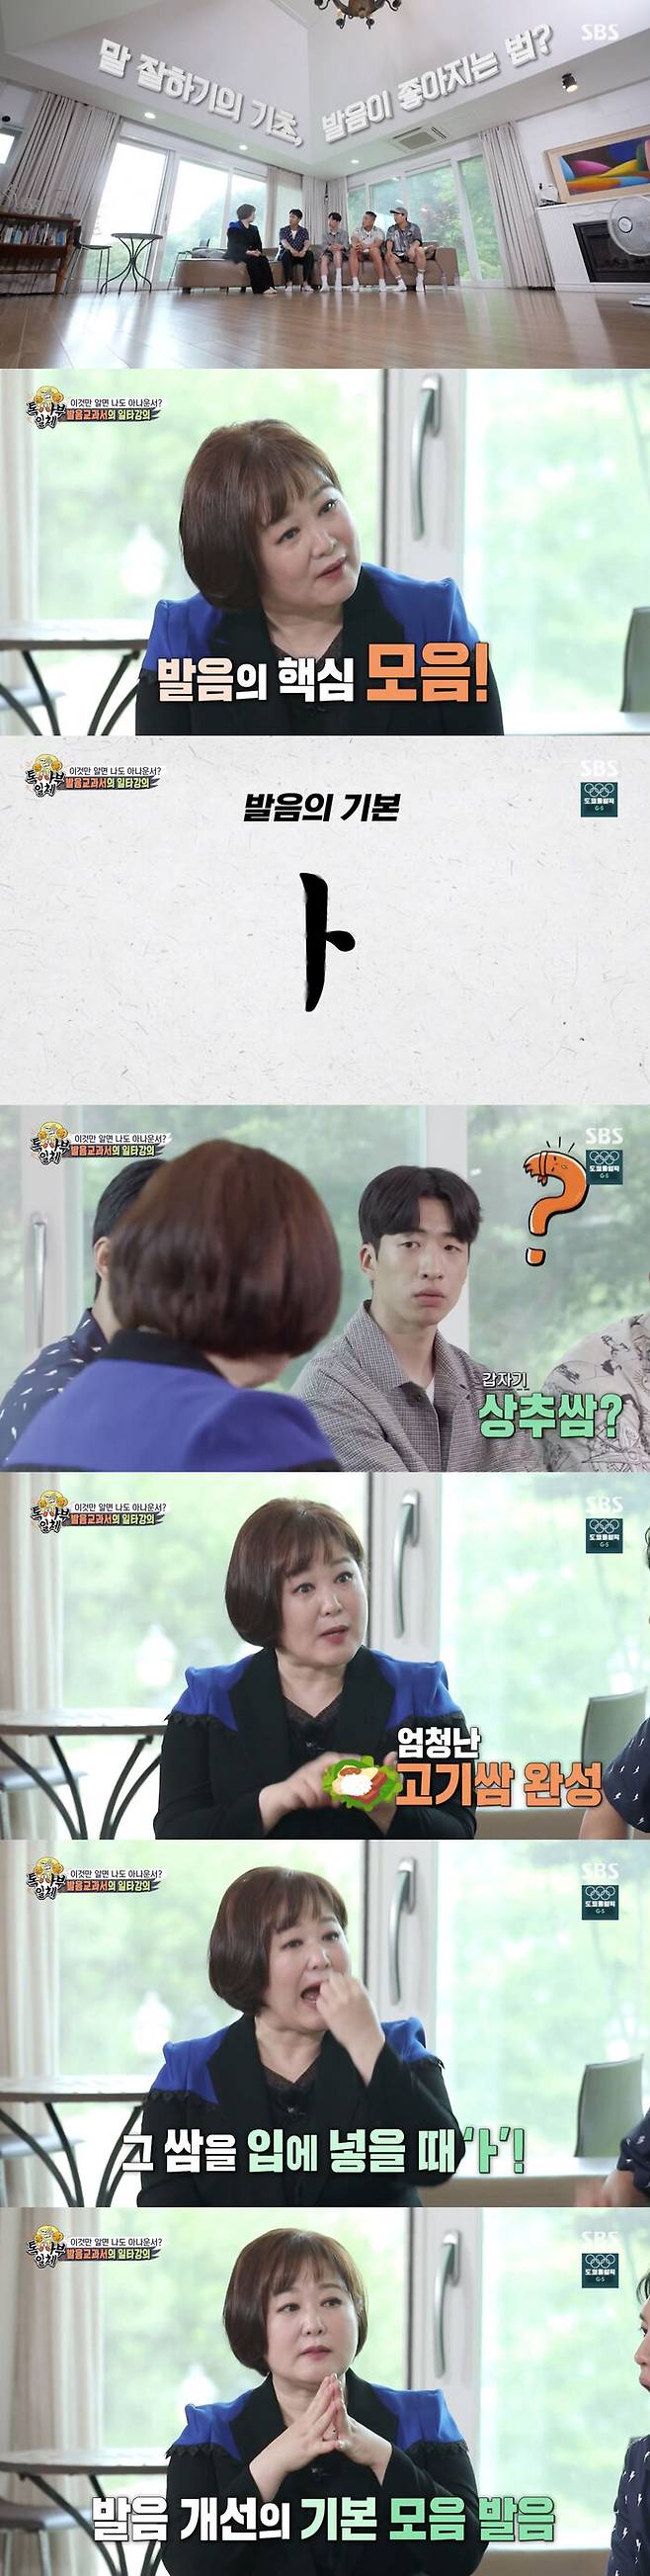 Master Lee Geum-hee revealed tips that improve his pronunciation.On SBS All The Butlers broadcasted on the 18th, Master Lee Geum-hee handed down the tips of pronunciation well.On the day of the broadcast, Lee Geum-hee emphasized that the secret to good pronunciation is practice only Ida, and emphasized that the most important thing to pronounce well is vowels.The most basic of the vowel is Ida, he said. It is economically pronounced when pronouncing it, so most of them do not pronounce it properly.Lee said, To make the correct pronunciation of lettuce, pack lettuce first. Put a sesame leaf, two meats, garlic, ssamjang, rice, and a spoon in two lettuce.How big is the ssam? Think that I put it in my mouth and pronounce it. Thats the correct pronunciation Ida.The reason why the pronunciation is unfamiliar is because it did not pronounce it properly, Lee said. You should not open your mouth well.Pronunciation of vowels is the basic Ida of pronunciation improvement. He once again emphasized the importance of vowels.